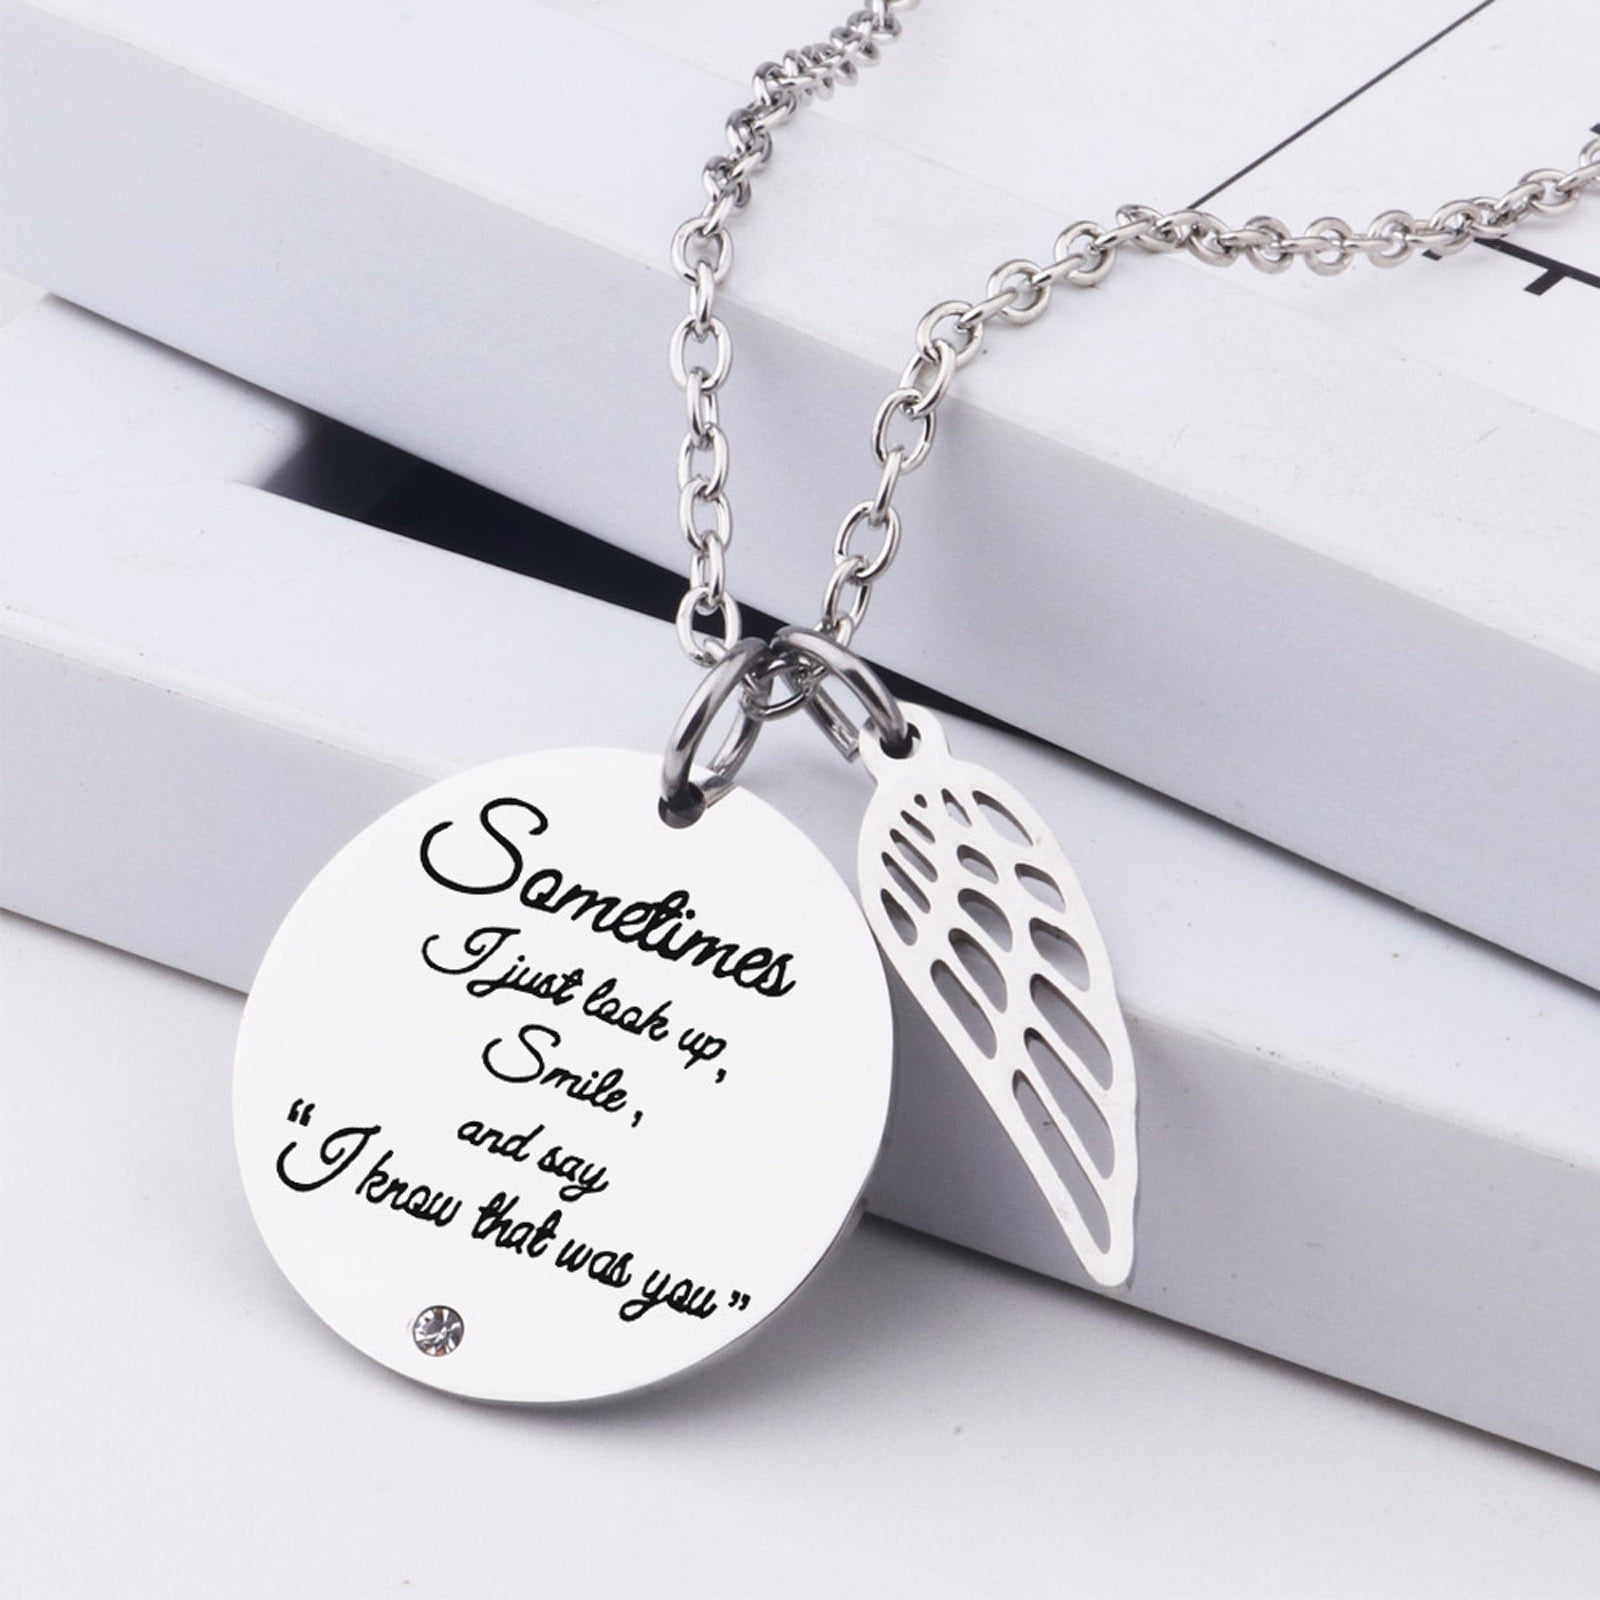 I Just Smile and Say “I Know That was You” Necklace for Women Diamond-Encrusted Angel Wing Best Friend Necklace Sometimes 